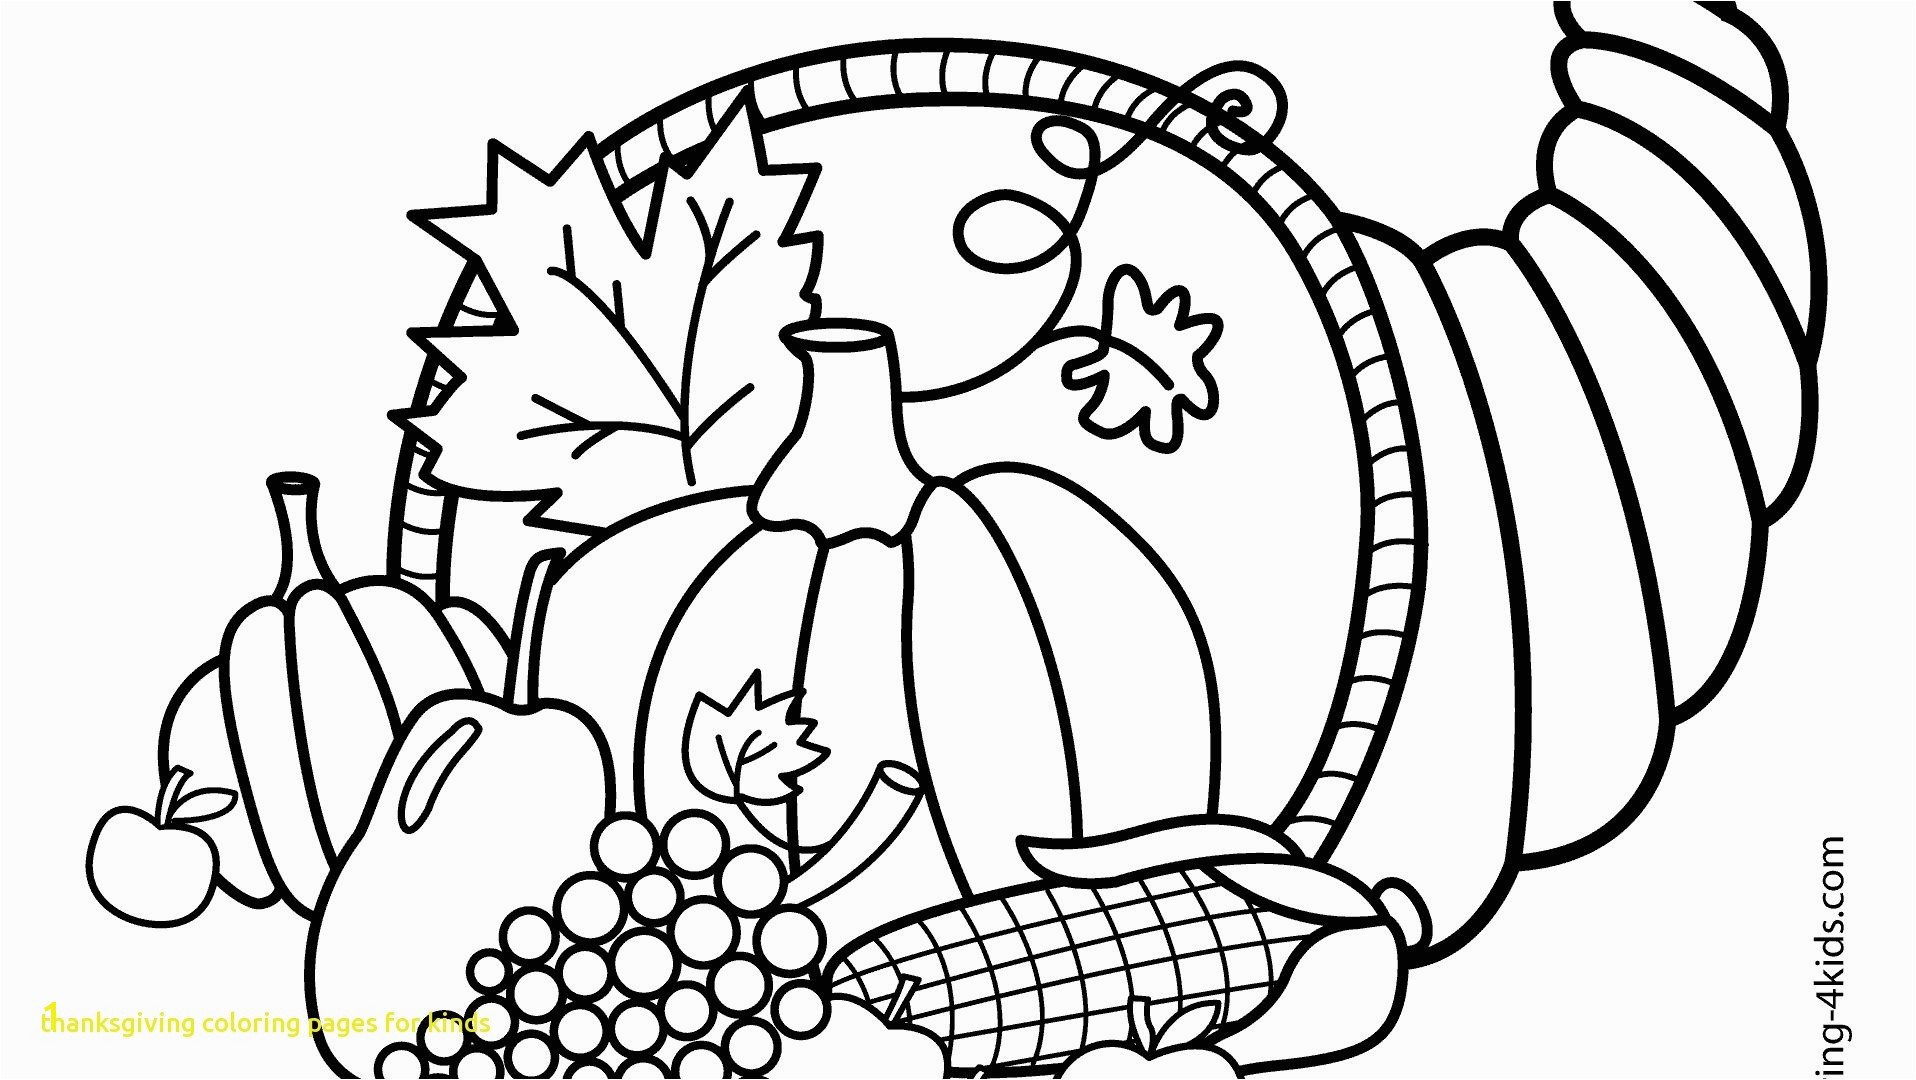 A Turkey for Thanksgiving Coloring Pages Printable Thanksgiving Coloring Pages Collection